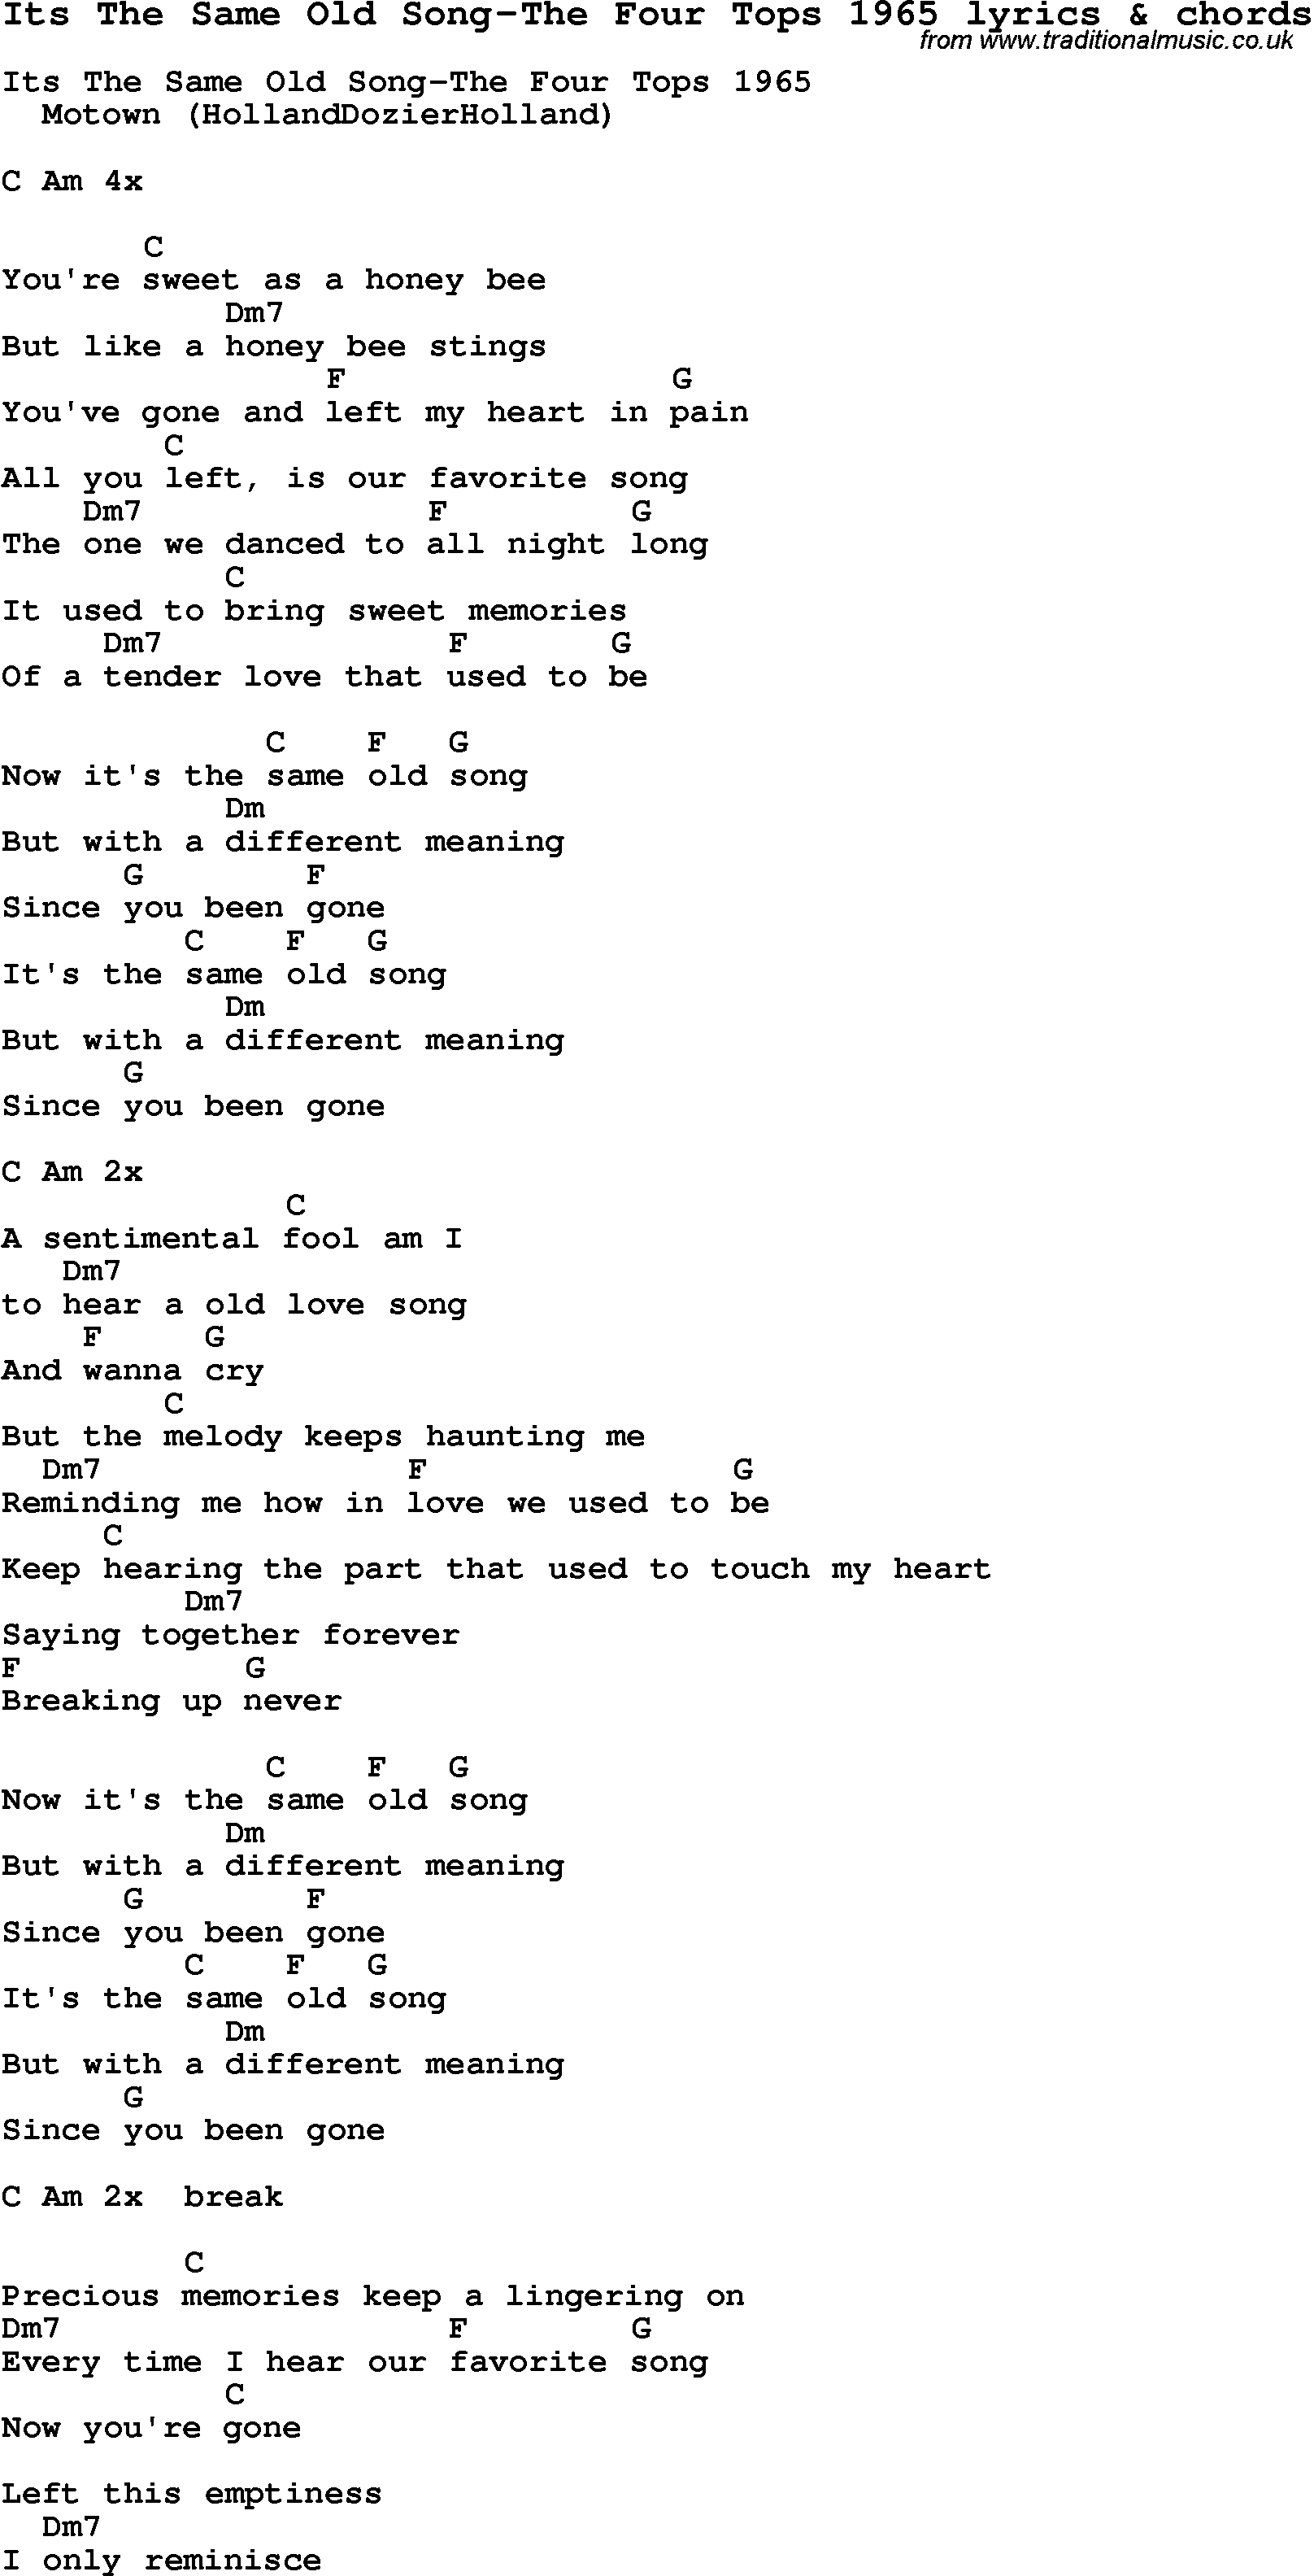 Love Song Lyrics for: Its The Same Old Song-The Four Tops 1965 with chords for Ukulele, Guitar Banjo etc.